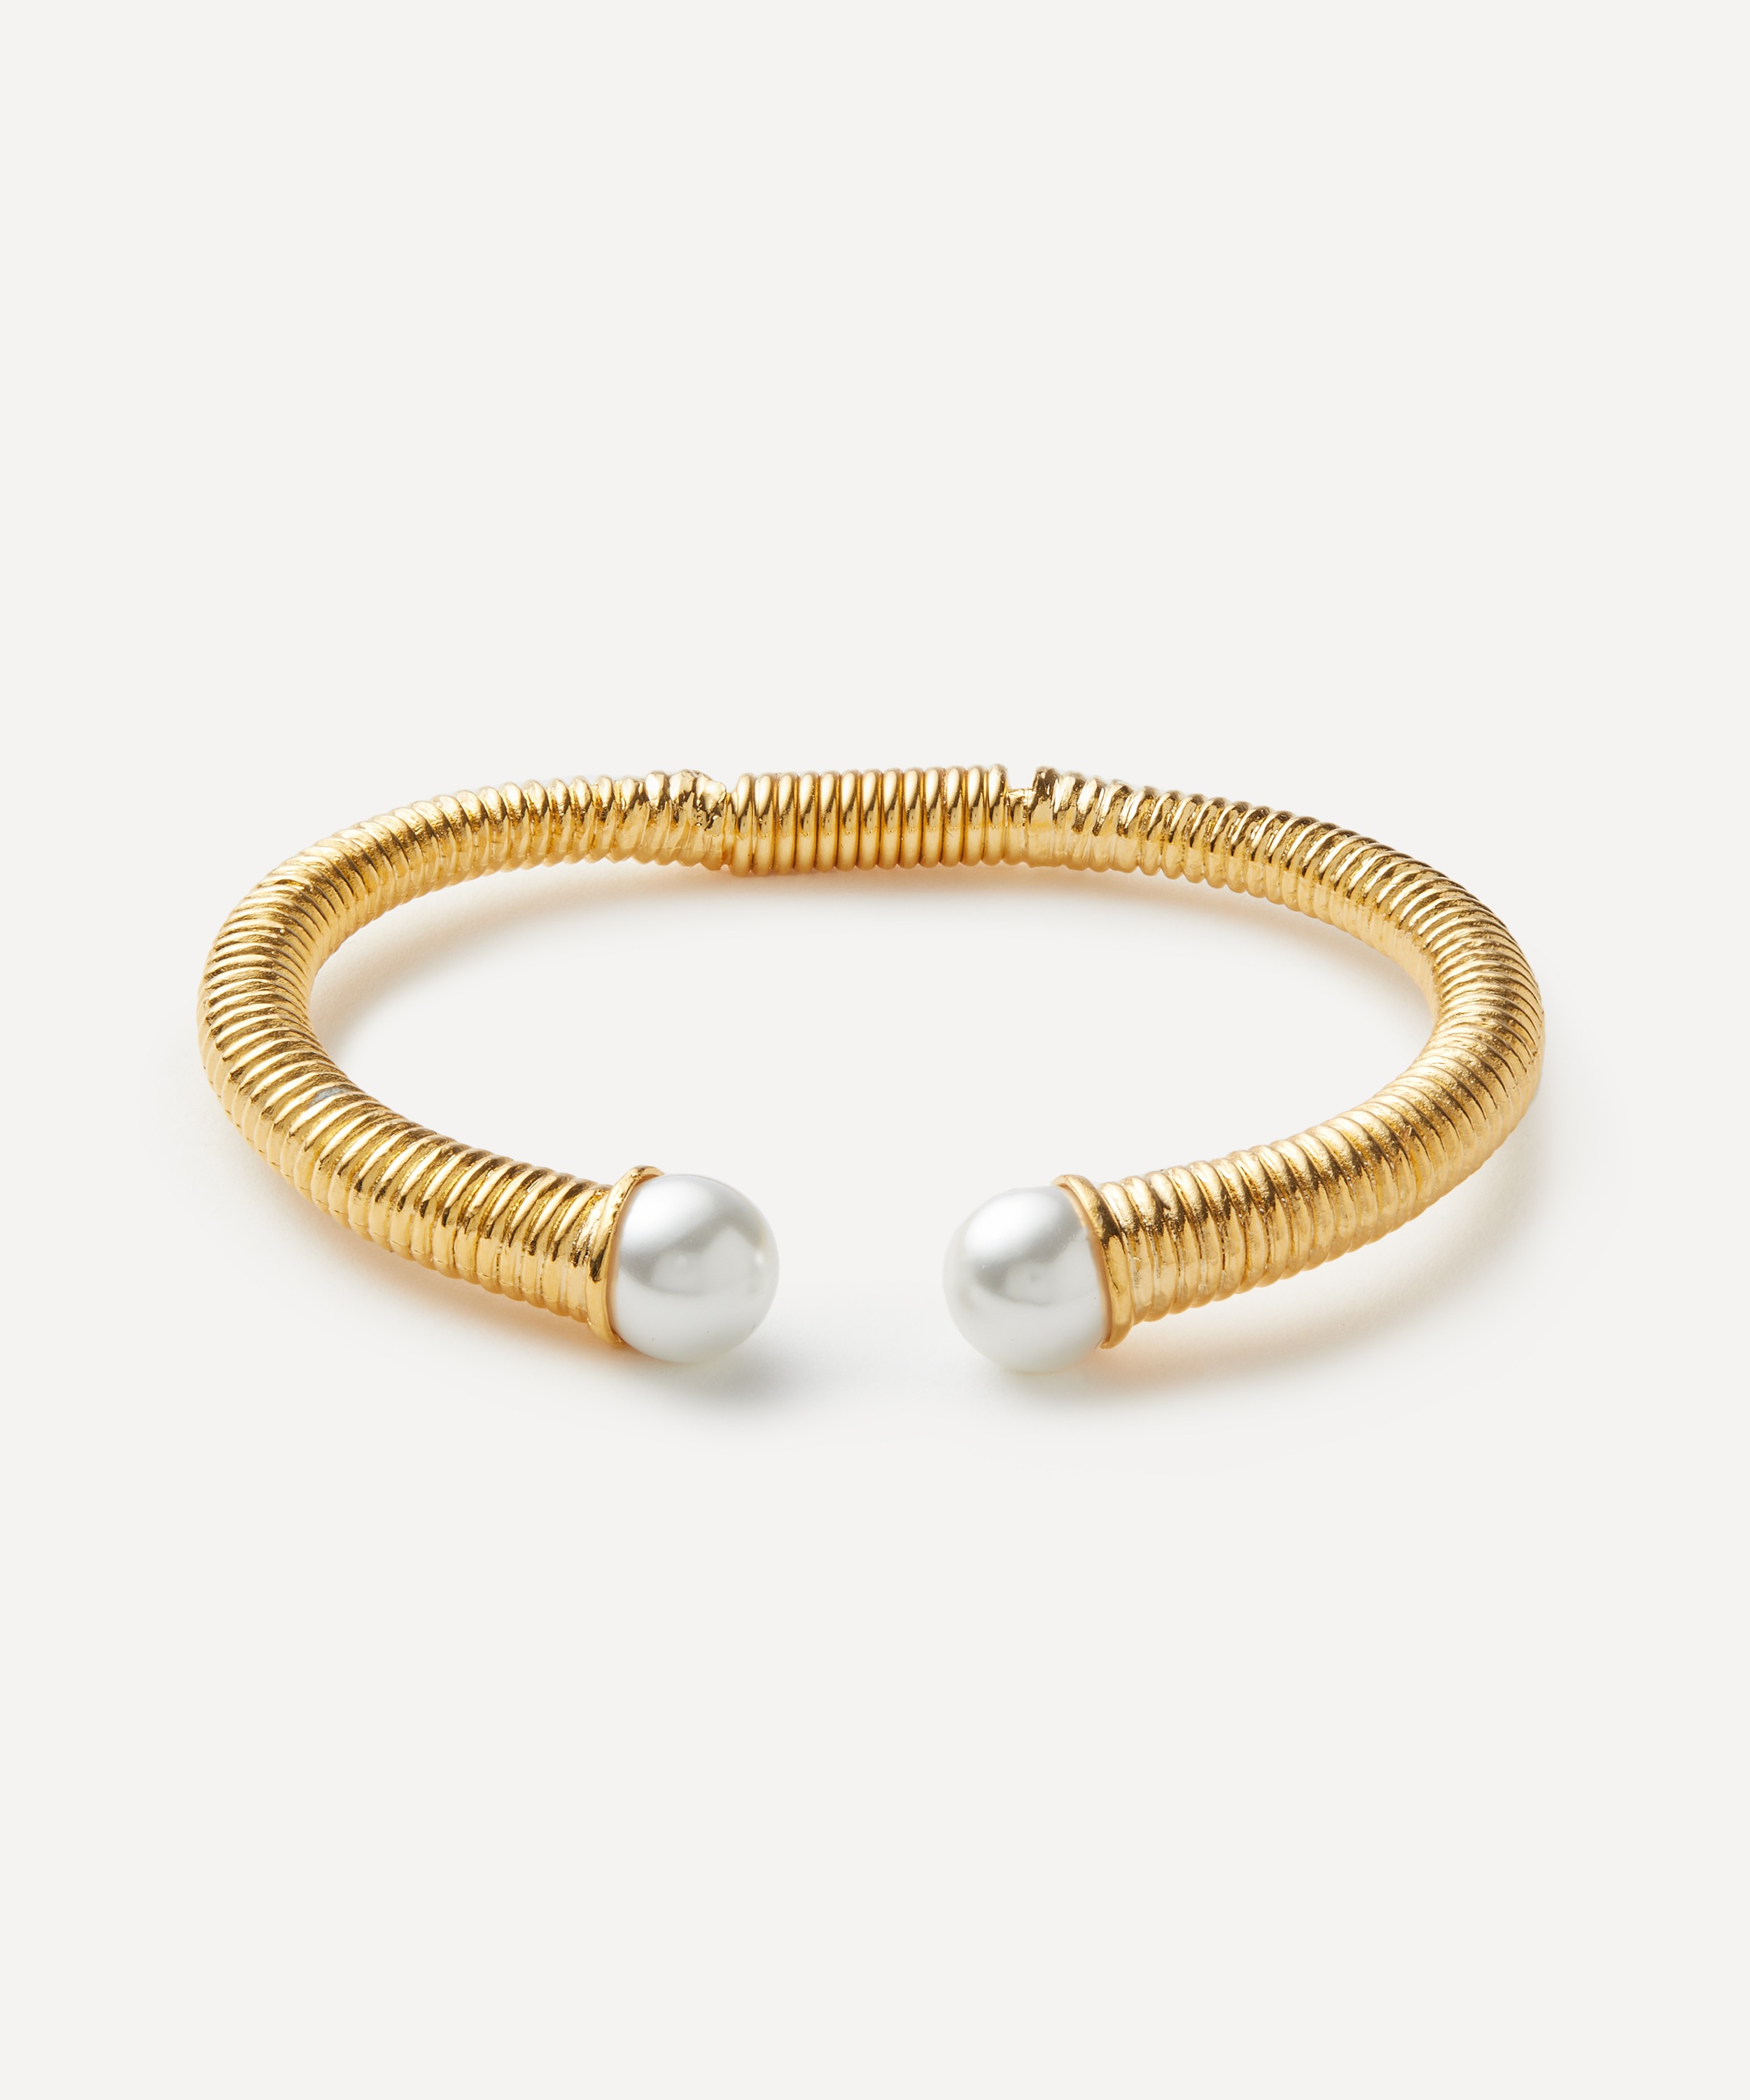 Kenneth Jay Lane - Gold-Plated Pearl Ends Cuff Bracelet